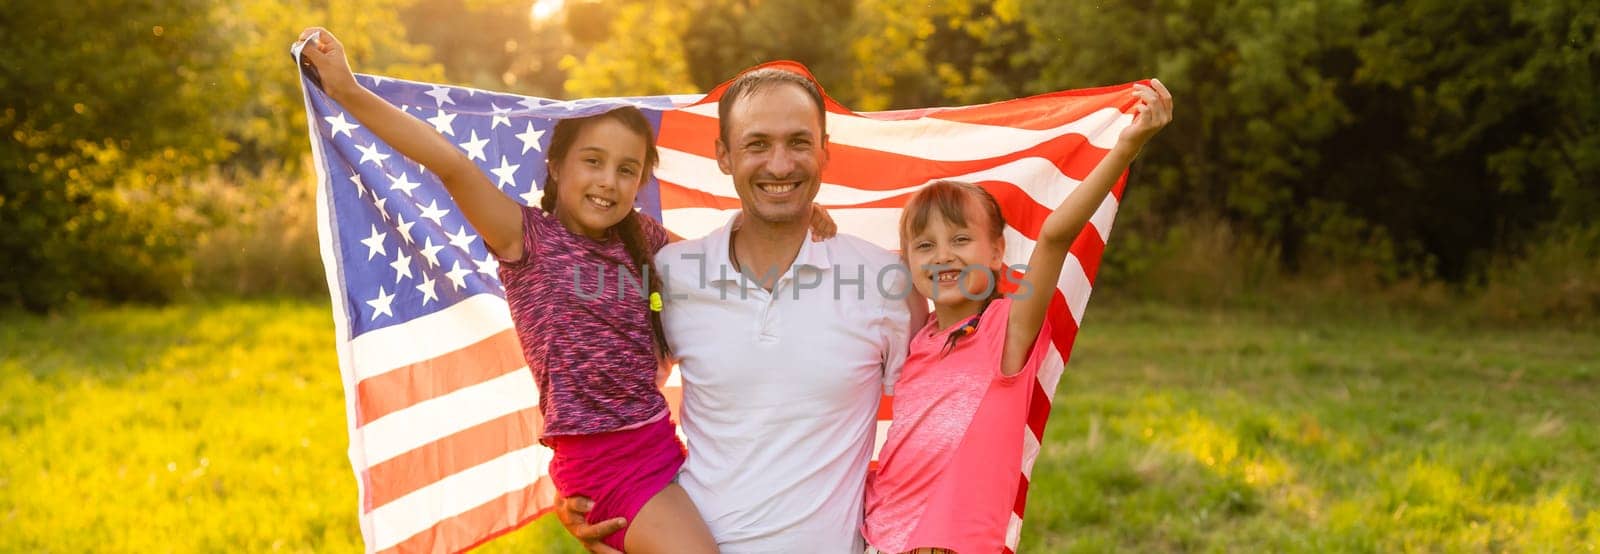 parents and child with American flag are playing with a colorful kite. mother, father and their little daughters celebrate together 4th of July outdoors in foggy day. Independence Day of USA concept